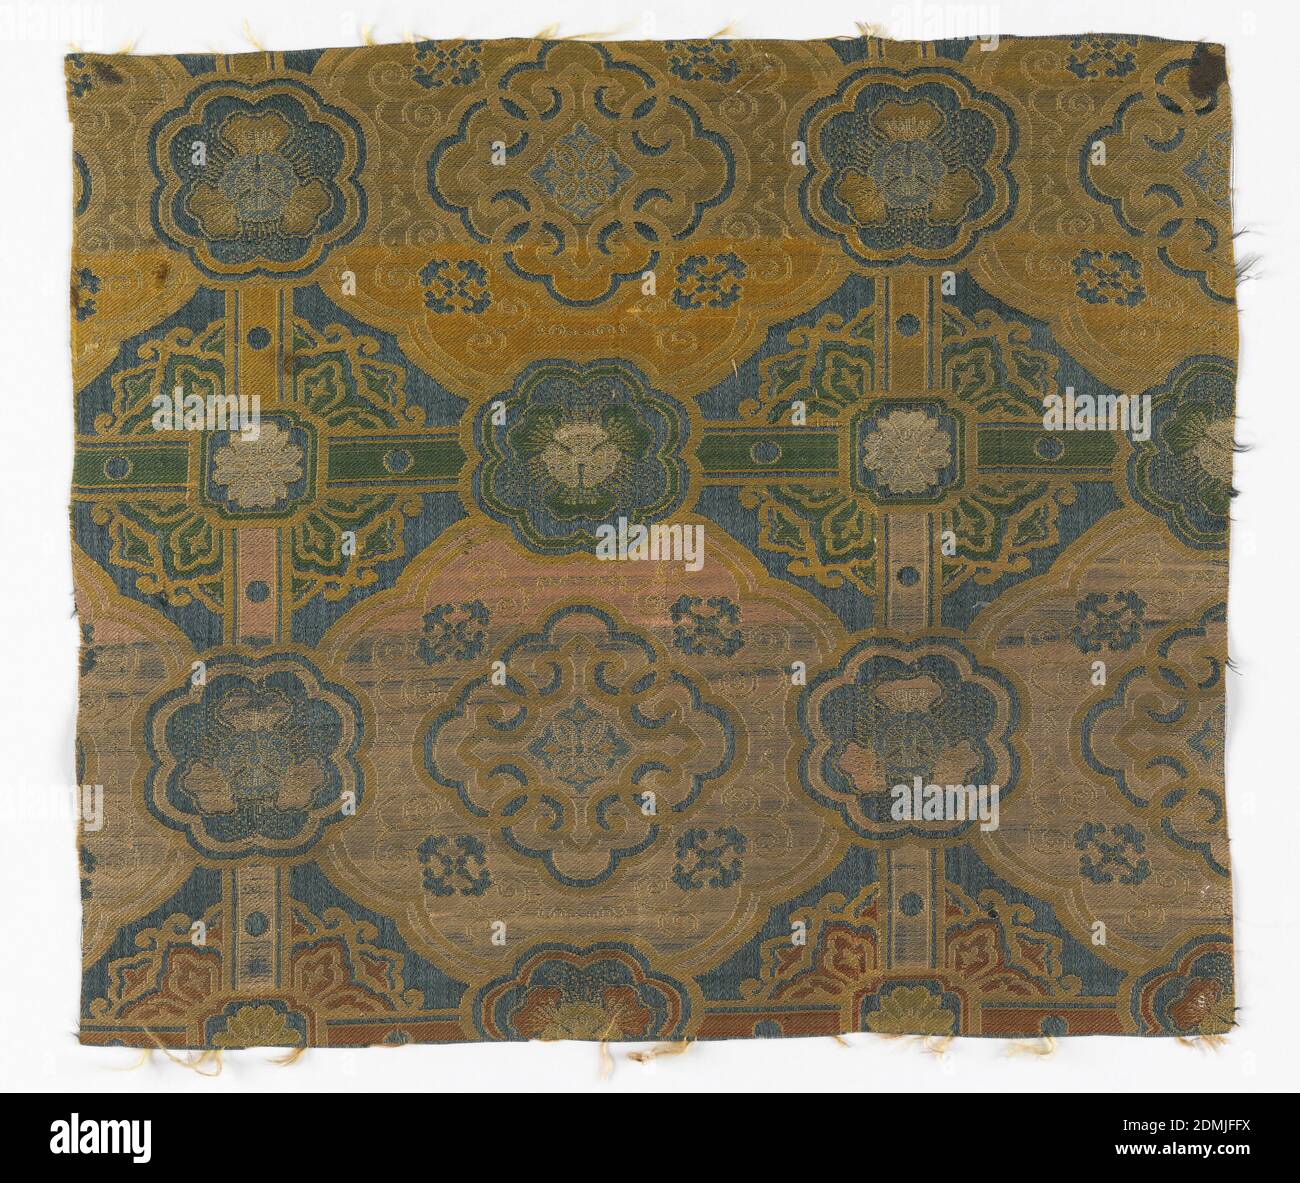 Fragment, Medium: silk Technique: plain compound weave, Subtle striped effect in gold, green, pink and orange. Pattern structured around a grid with bars interrupted with dots and flowers. Within each area of grid is a stylized floral shape with flowers and interlacing scrollwork., China, 17th–18th century, woven textiles, Fragment Stock Photo